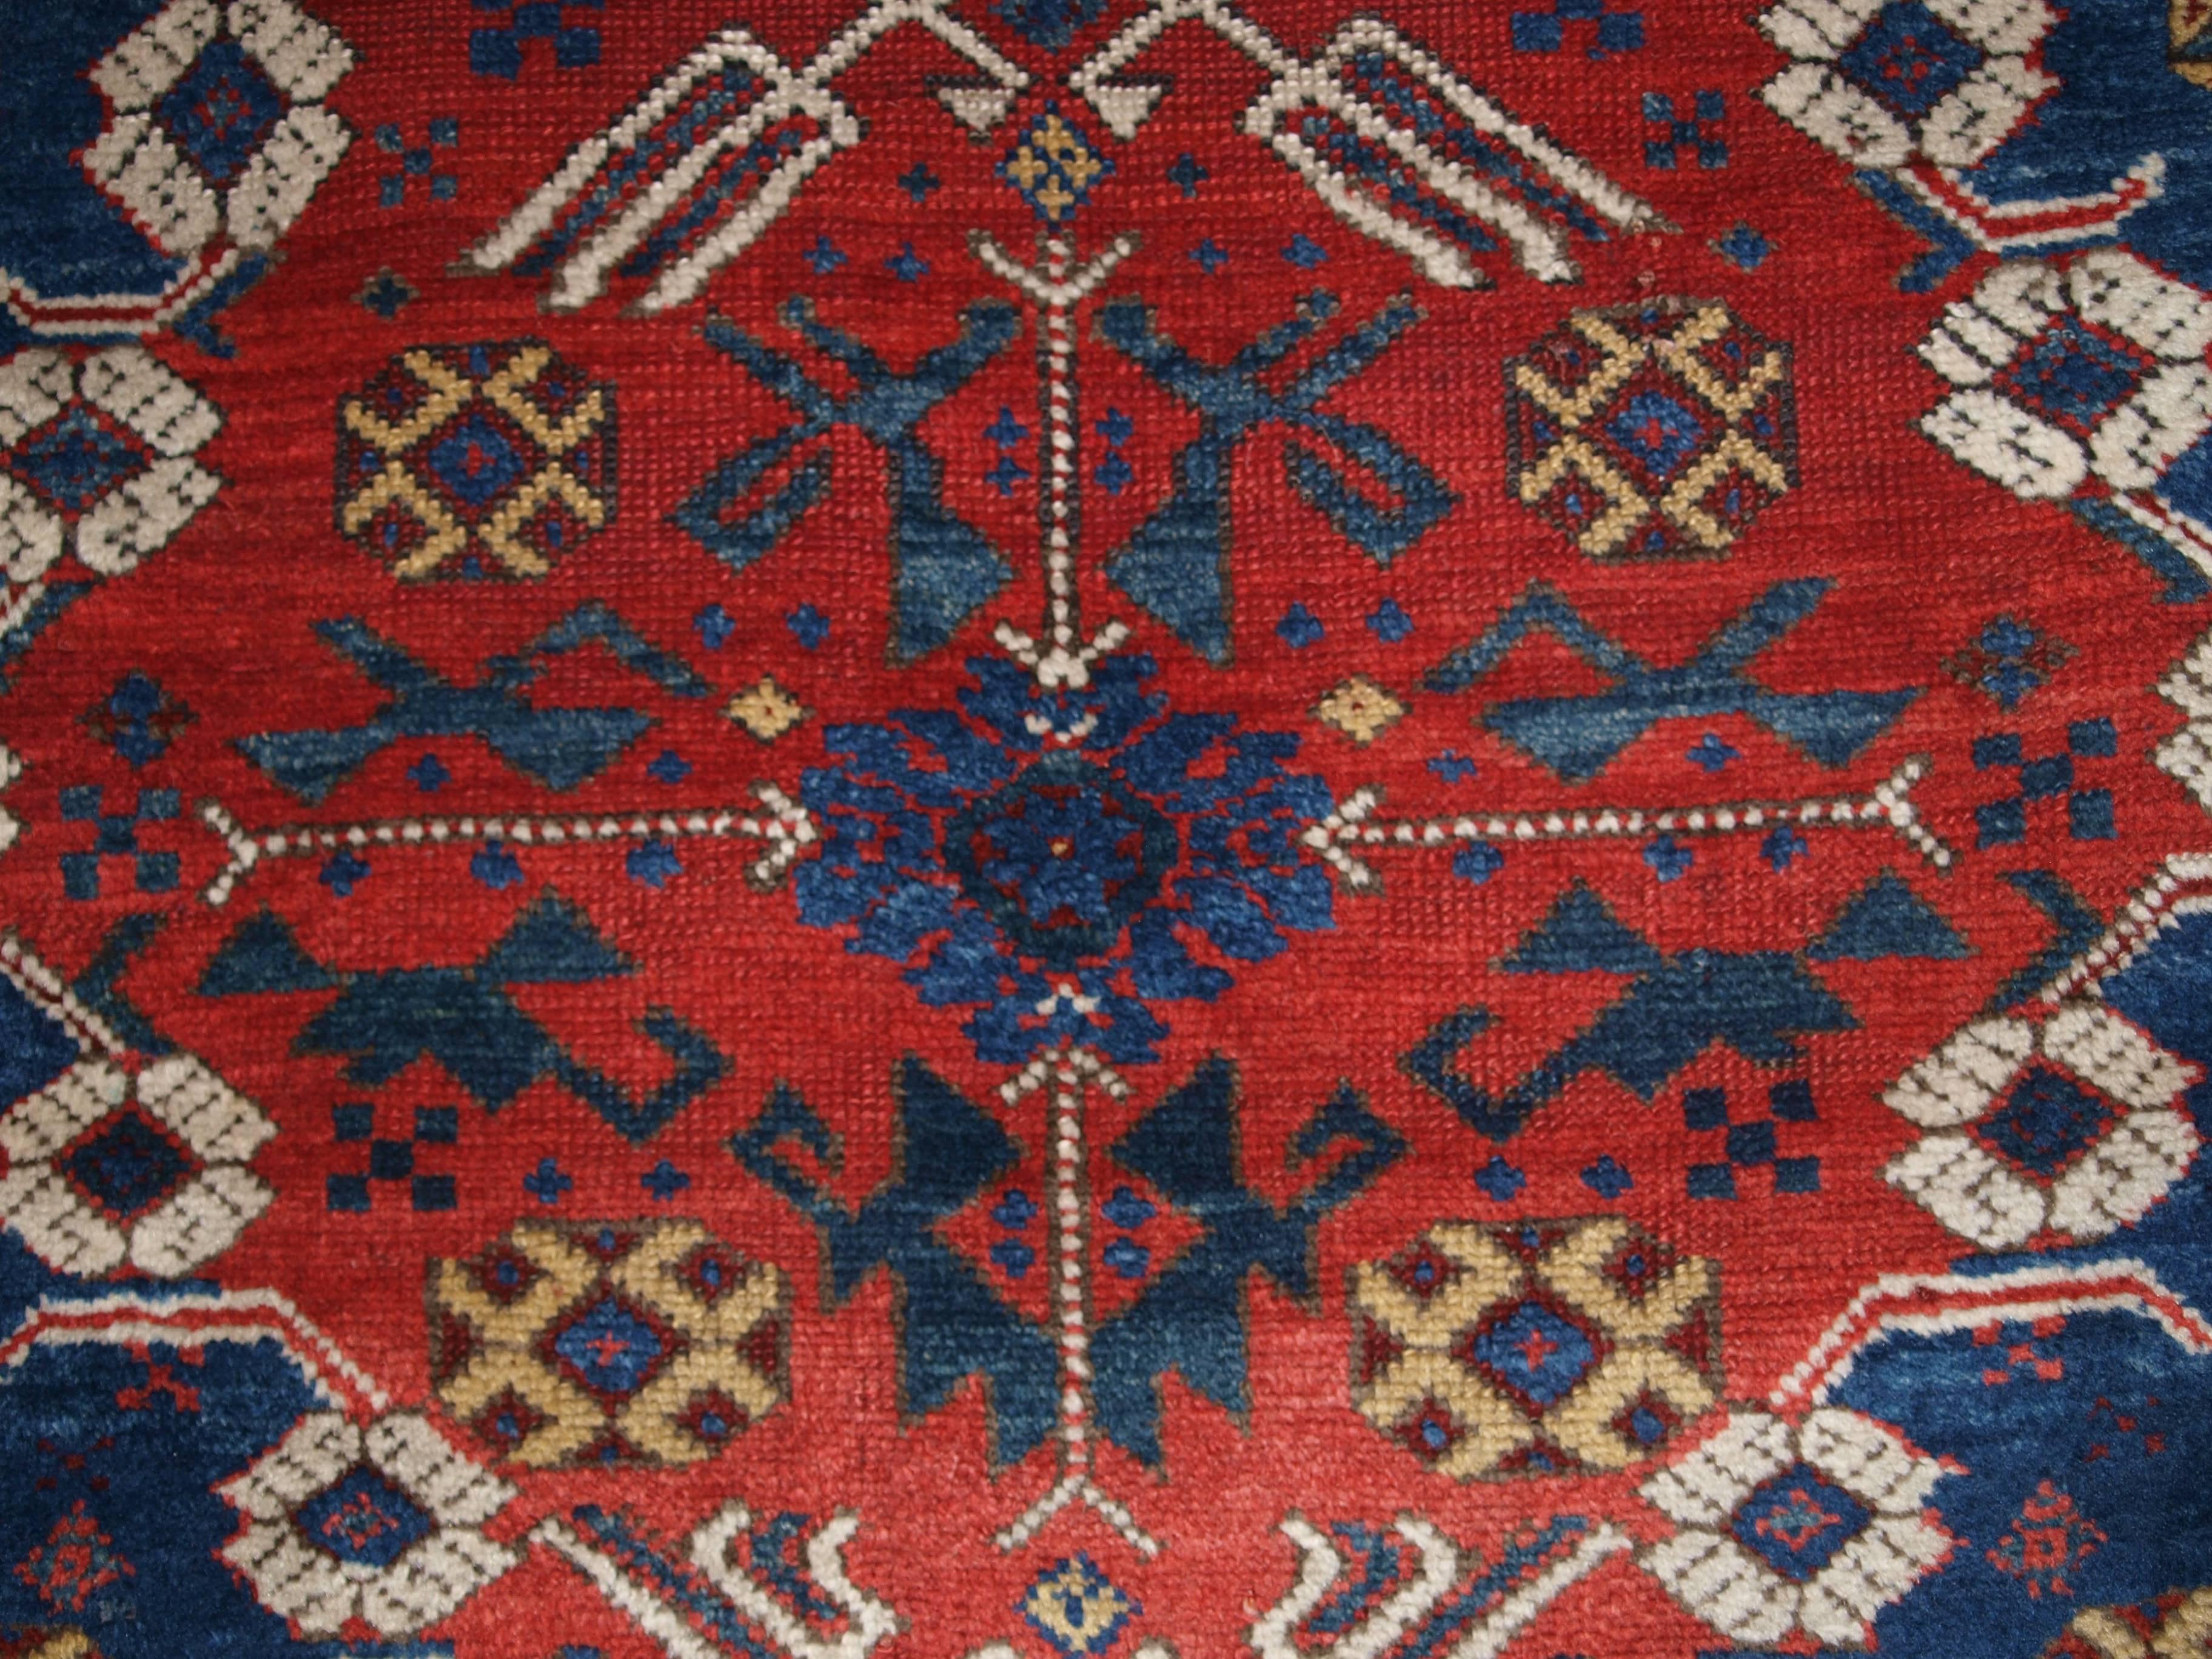 Wool Antique Turkish Bergama Rug of Classic Design with Superb Color, circa 1880 For Sale